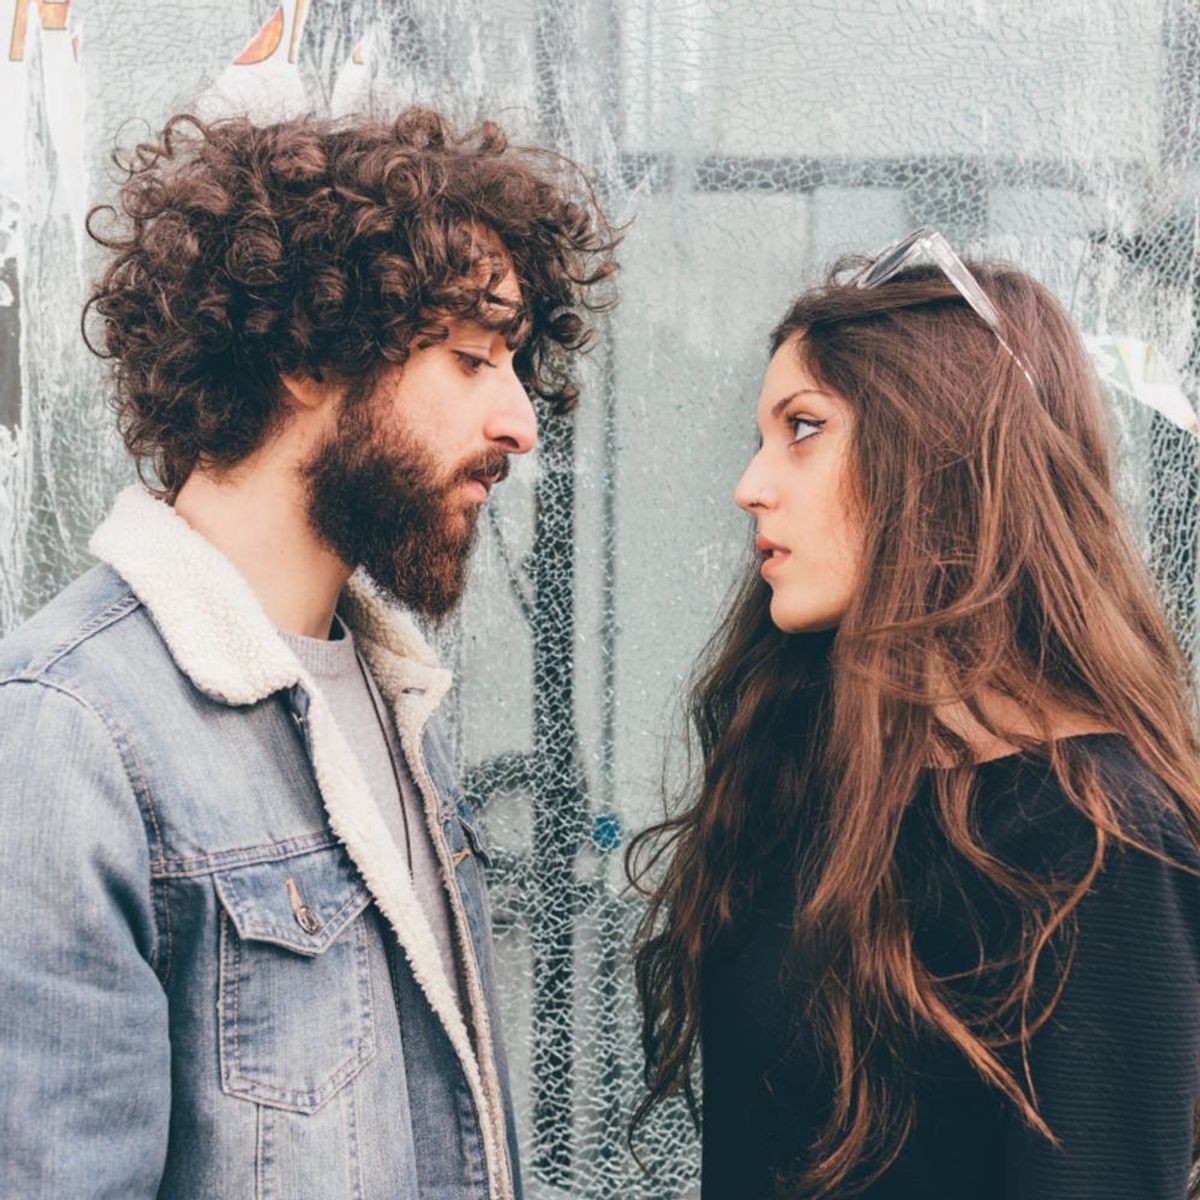 Your Biggest Struggle in Relationships, According to Your Myers-Briggs Type